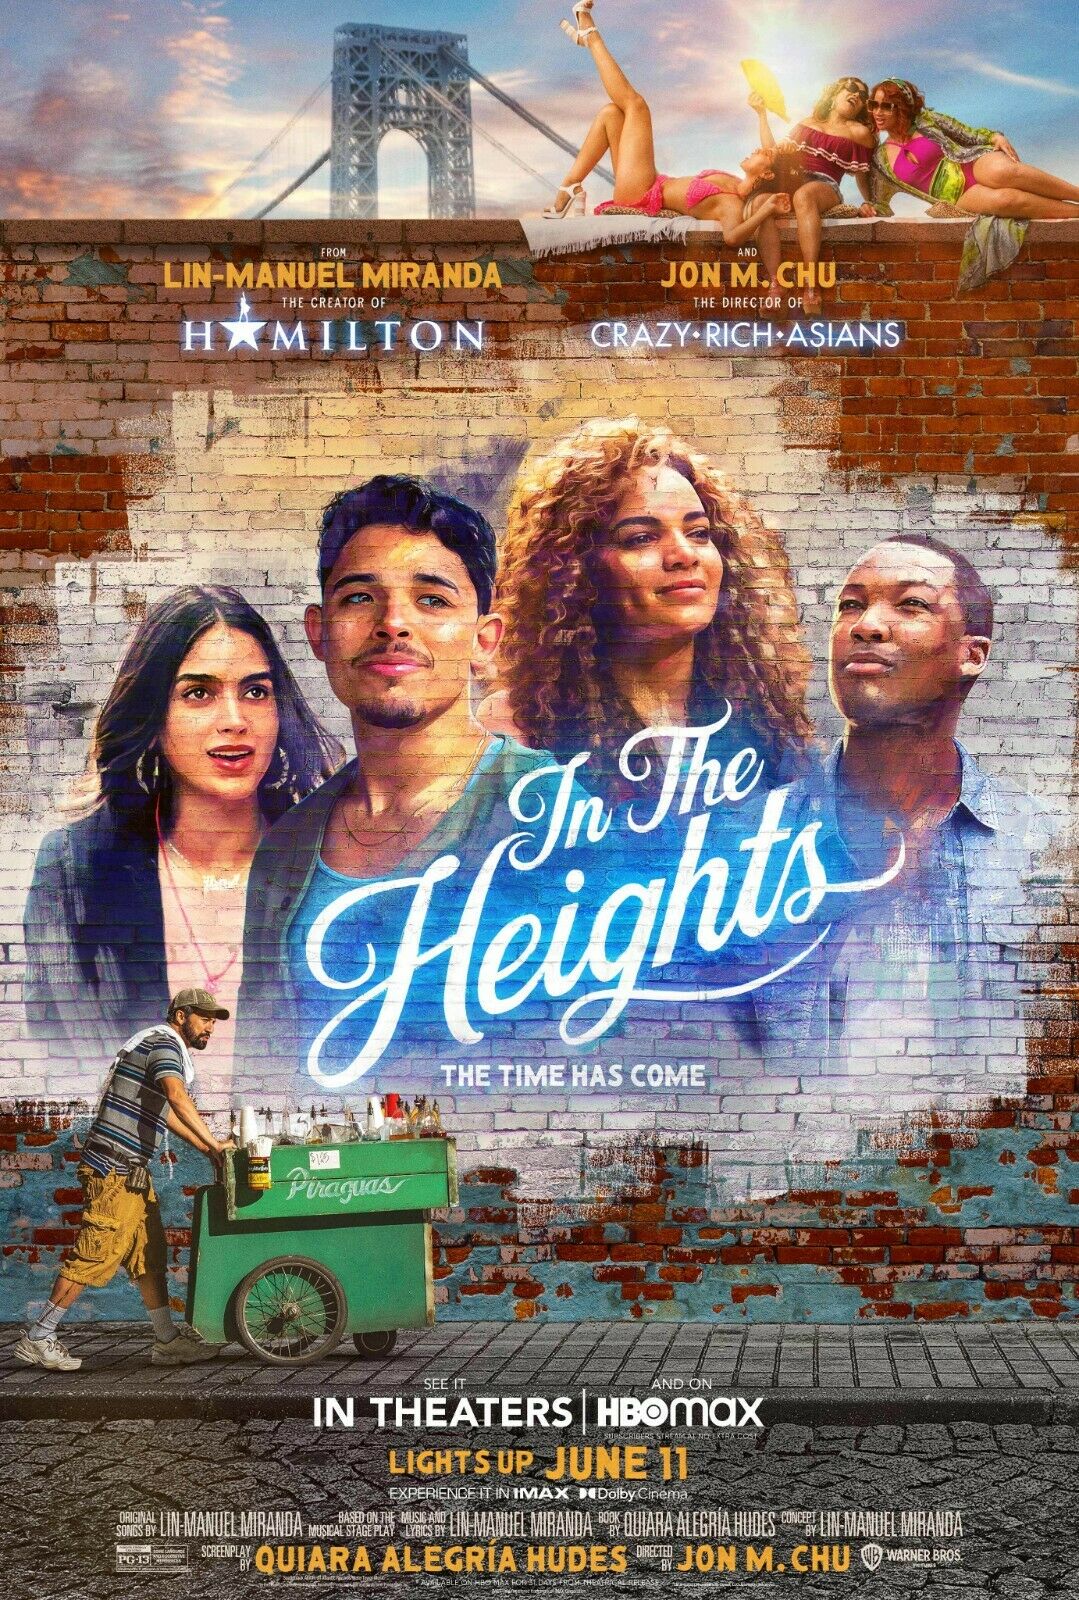 Graphic image of the movie poster for In the Heights